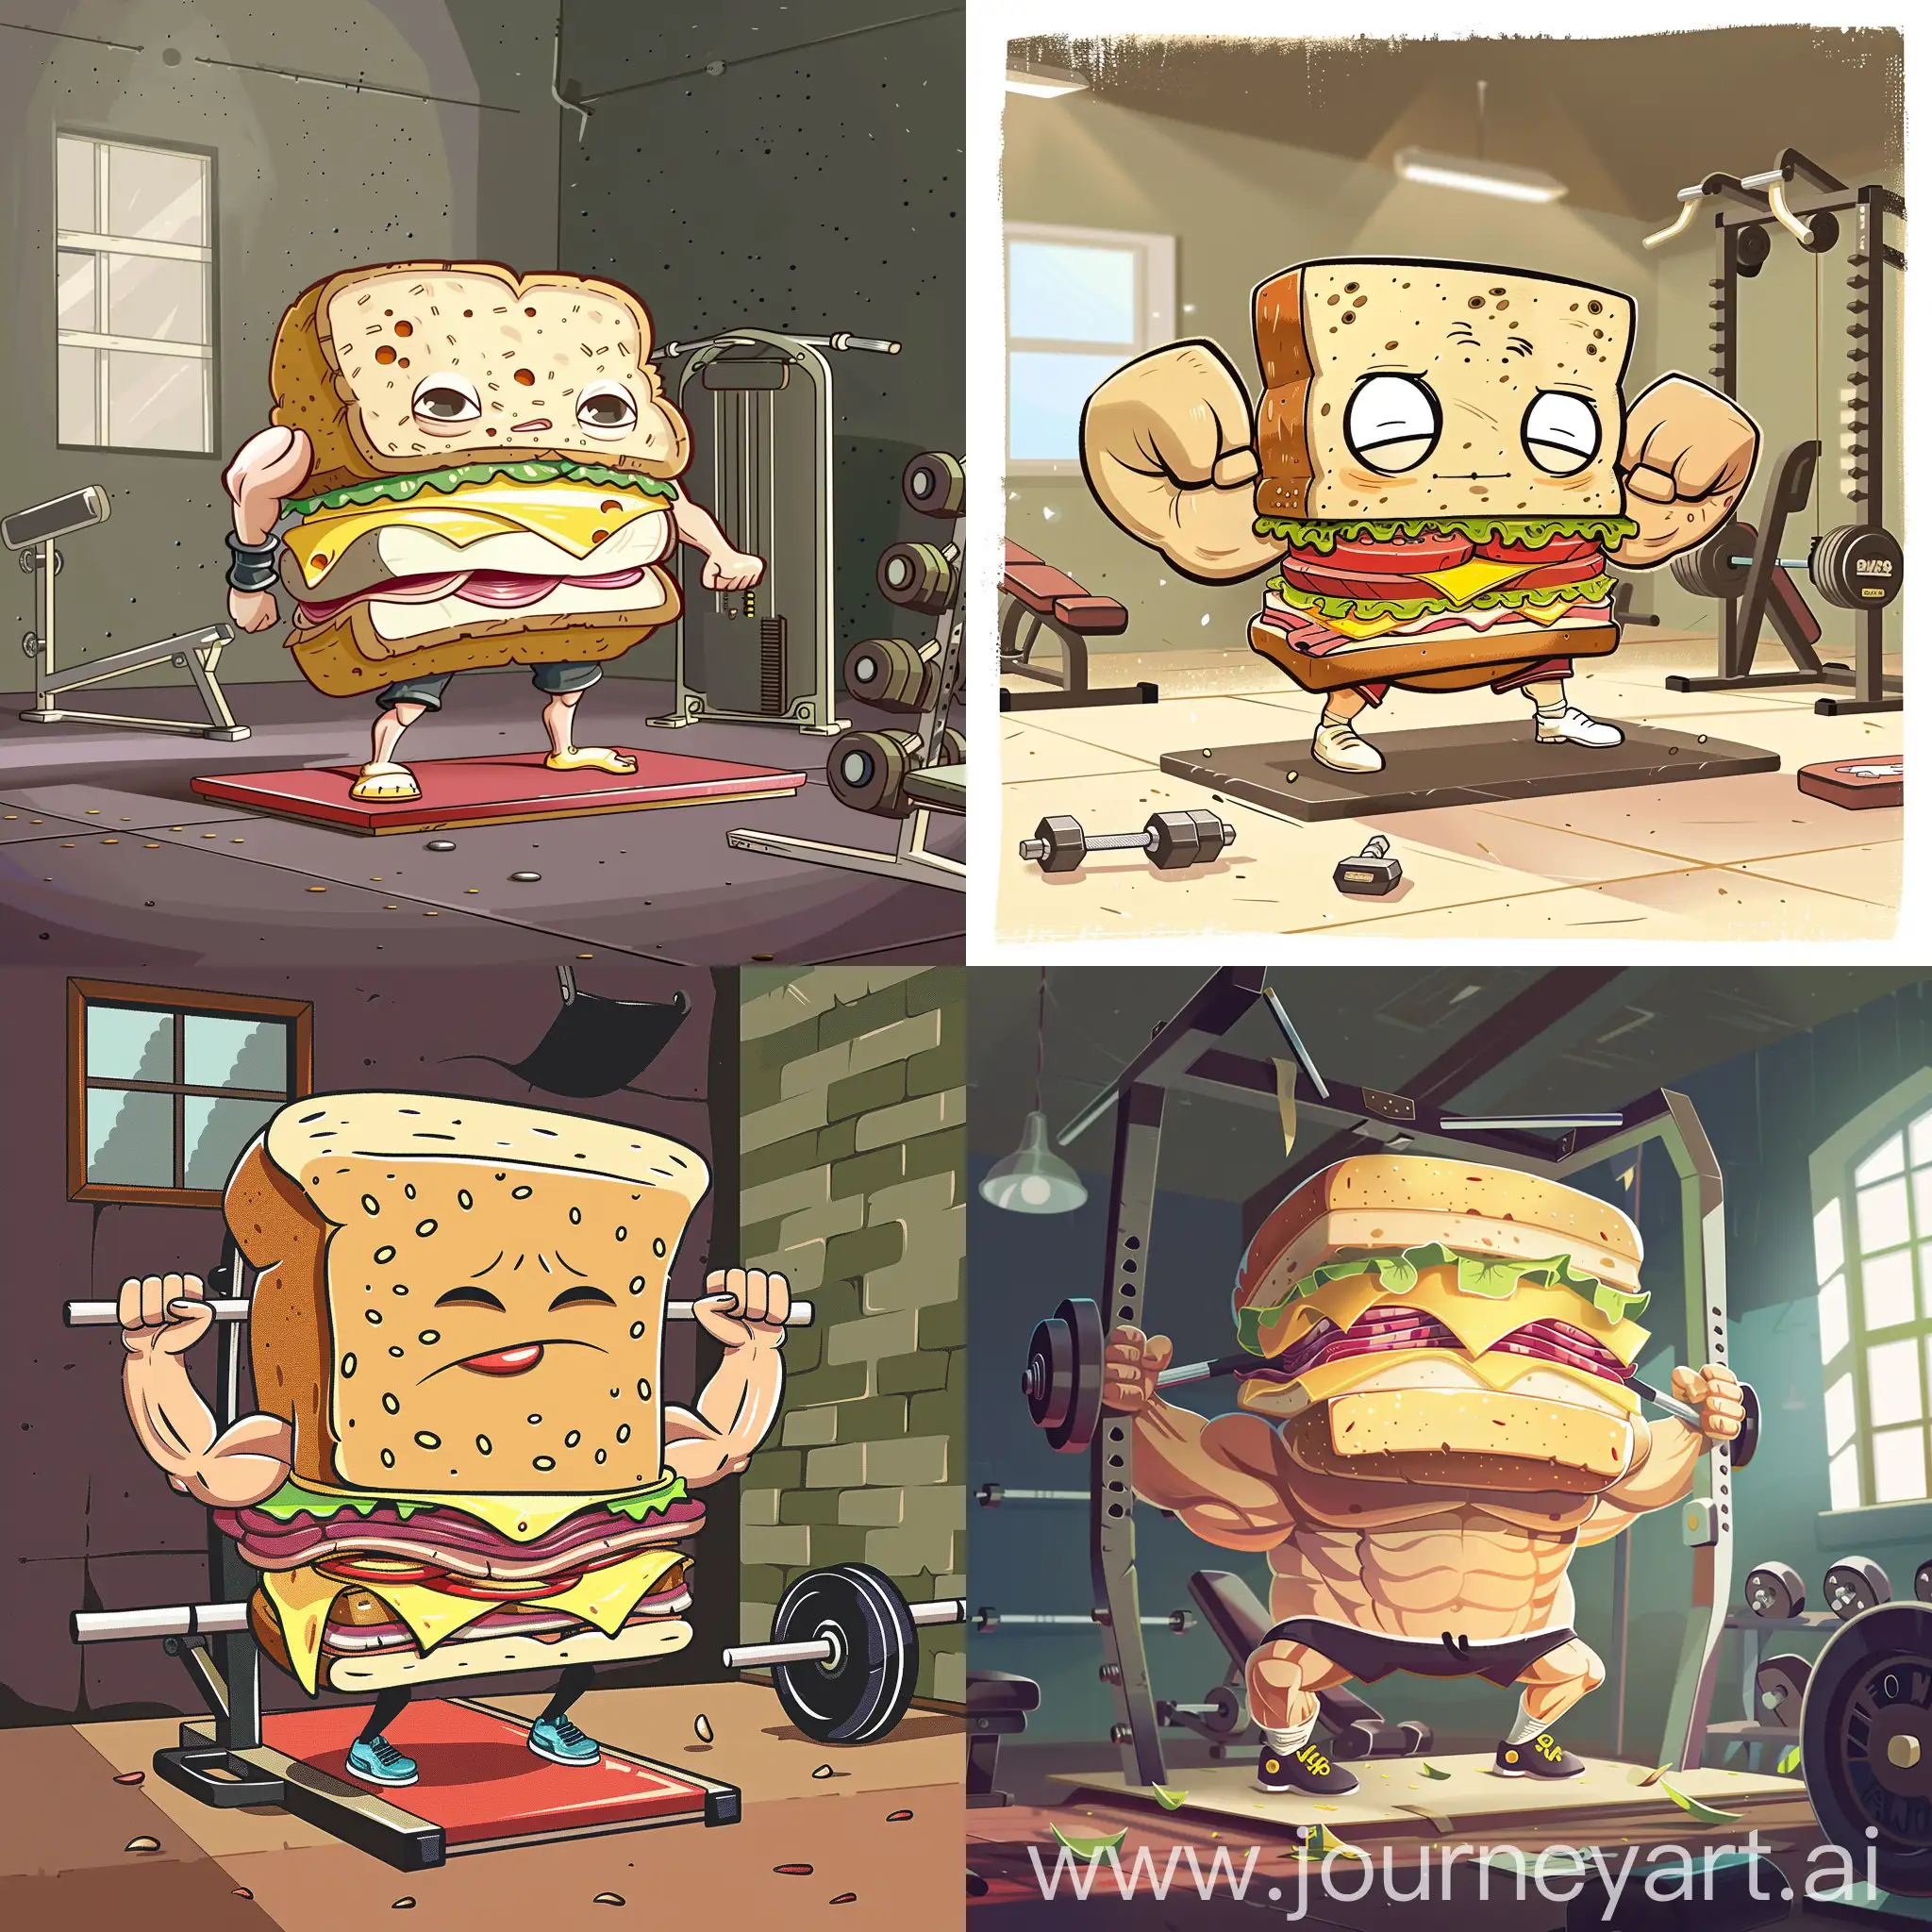 Cartoon image of a sandwhich with huge muscles working out at the gym